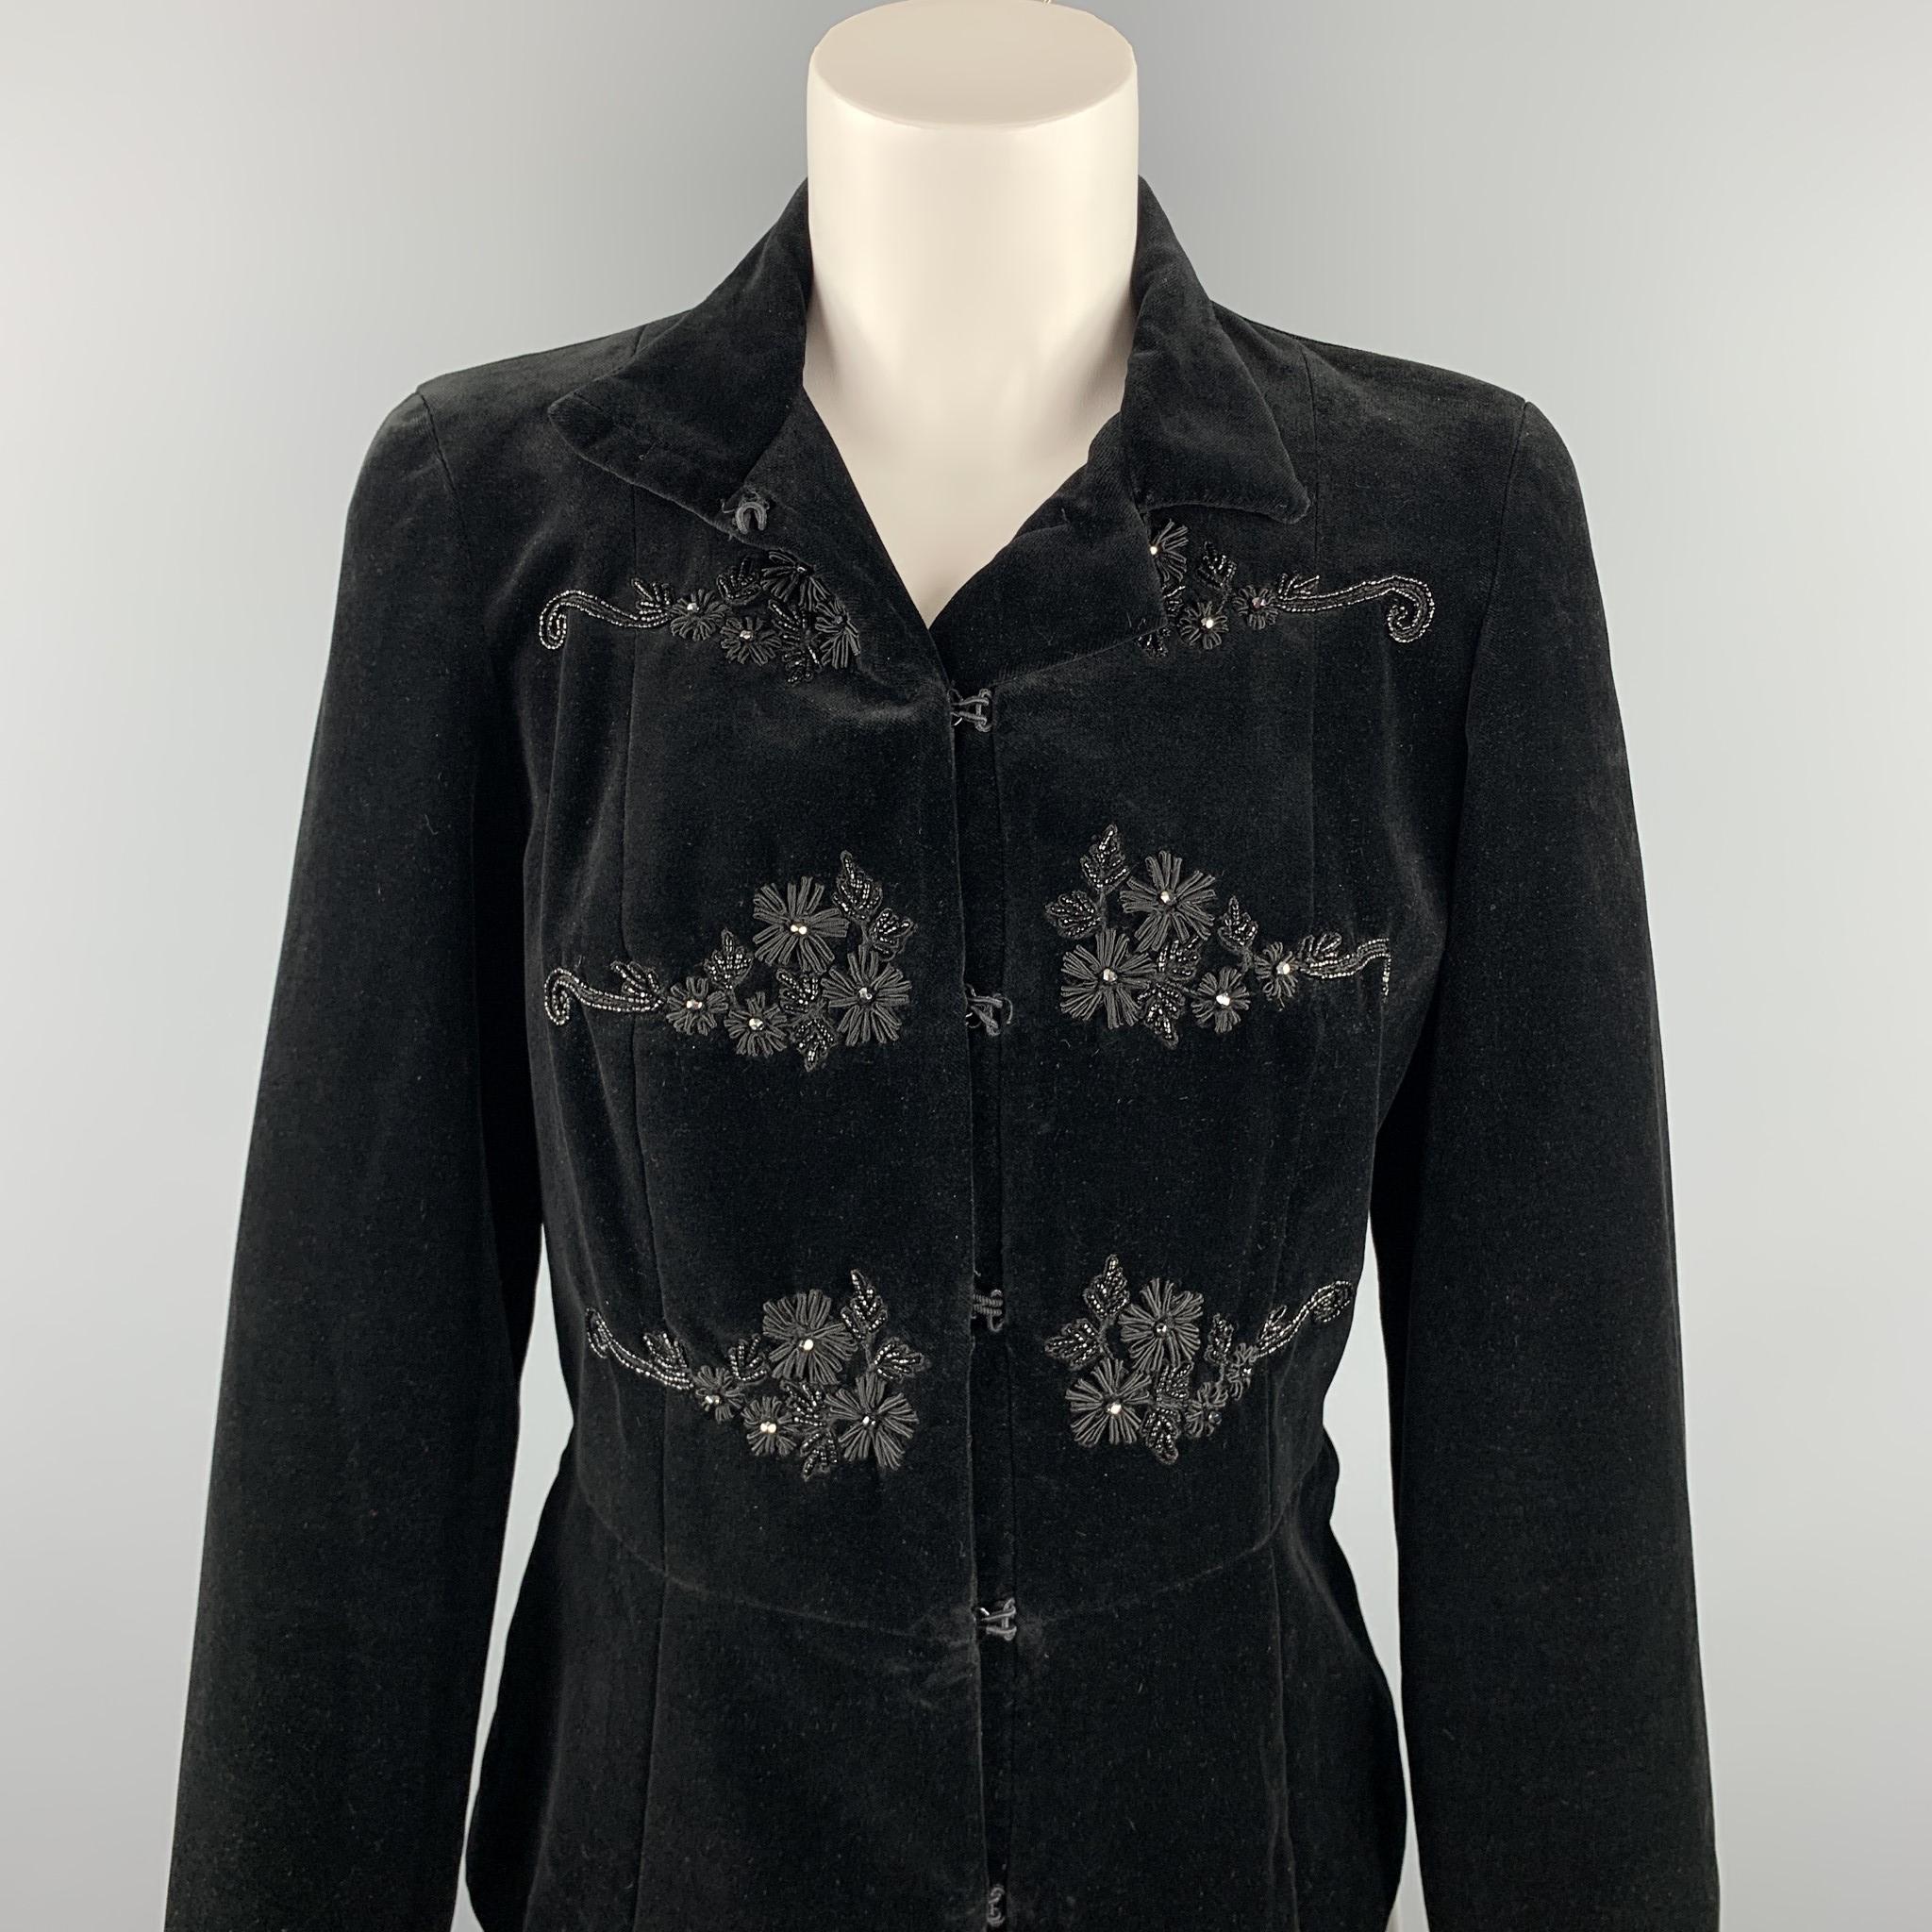 BLUMARINE jacket comes in a black cotton velvet with a full black liner featuring embroidered details, spread collar, and a hook & eye closure. Made in Italy.

Very Good Pre-Owned Condition.
Marked: IT 42 / D 36

Measurements:

Shoulder: 15